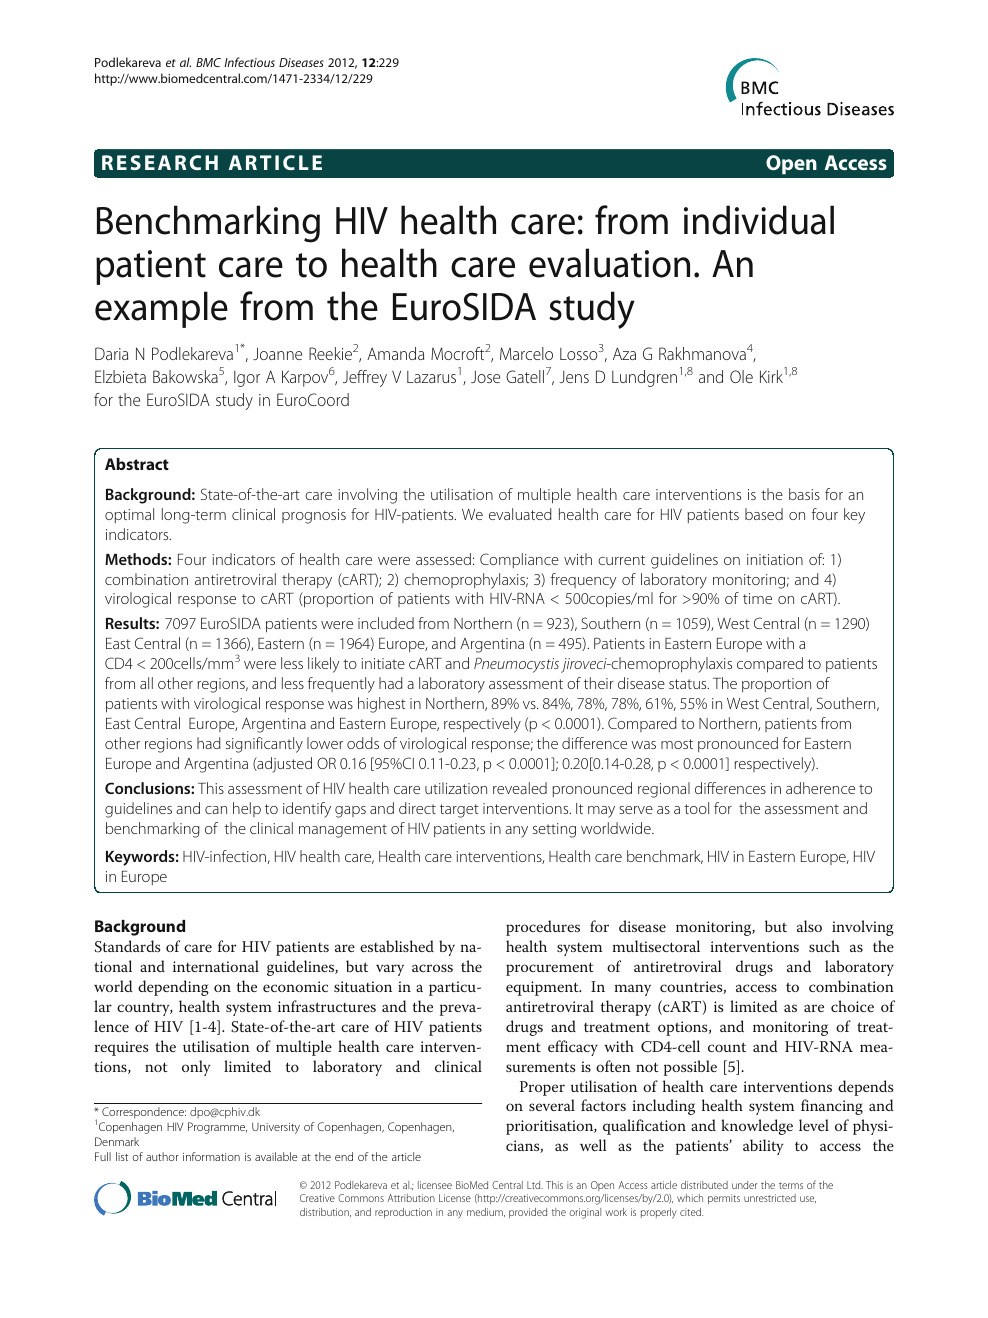 Benchmarking Hiv Health Care From Individual Patient Care To Health Care Evaluation An Example From The Eurosida Study Topic Of Research Paper In Health Sciences Download Scholarly Article Pdf And Read